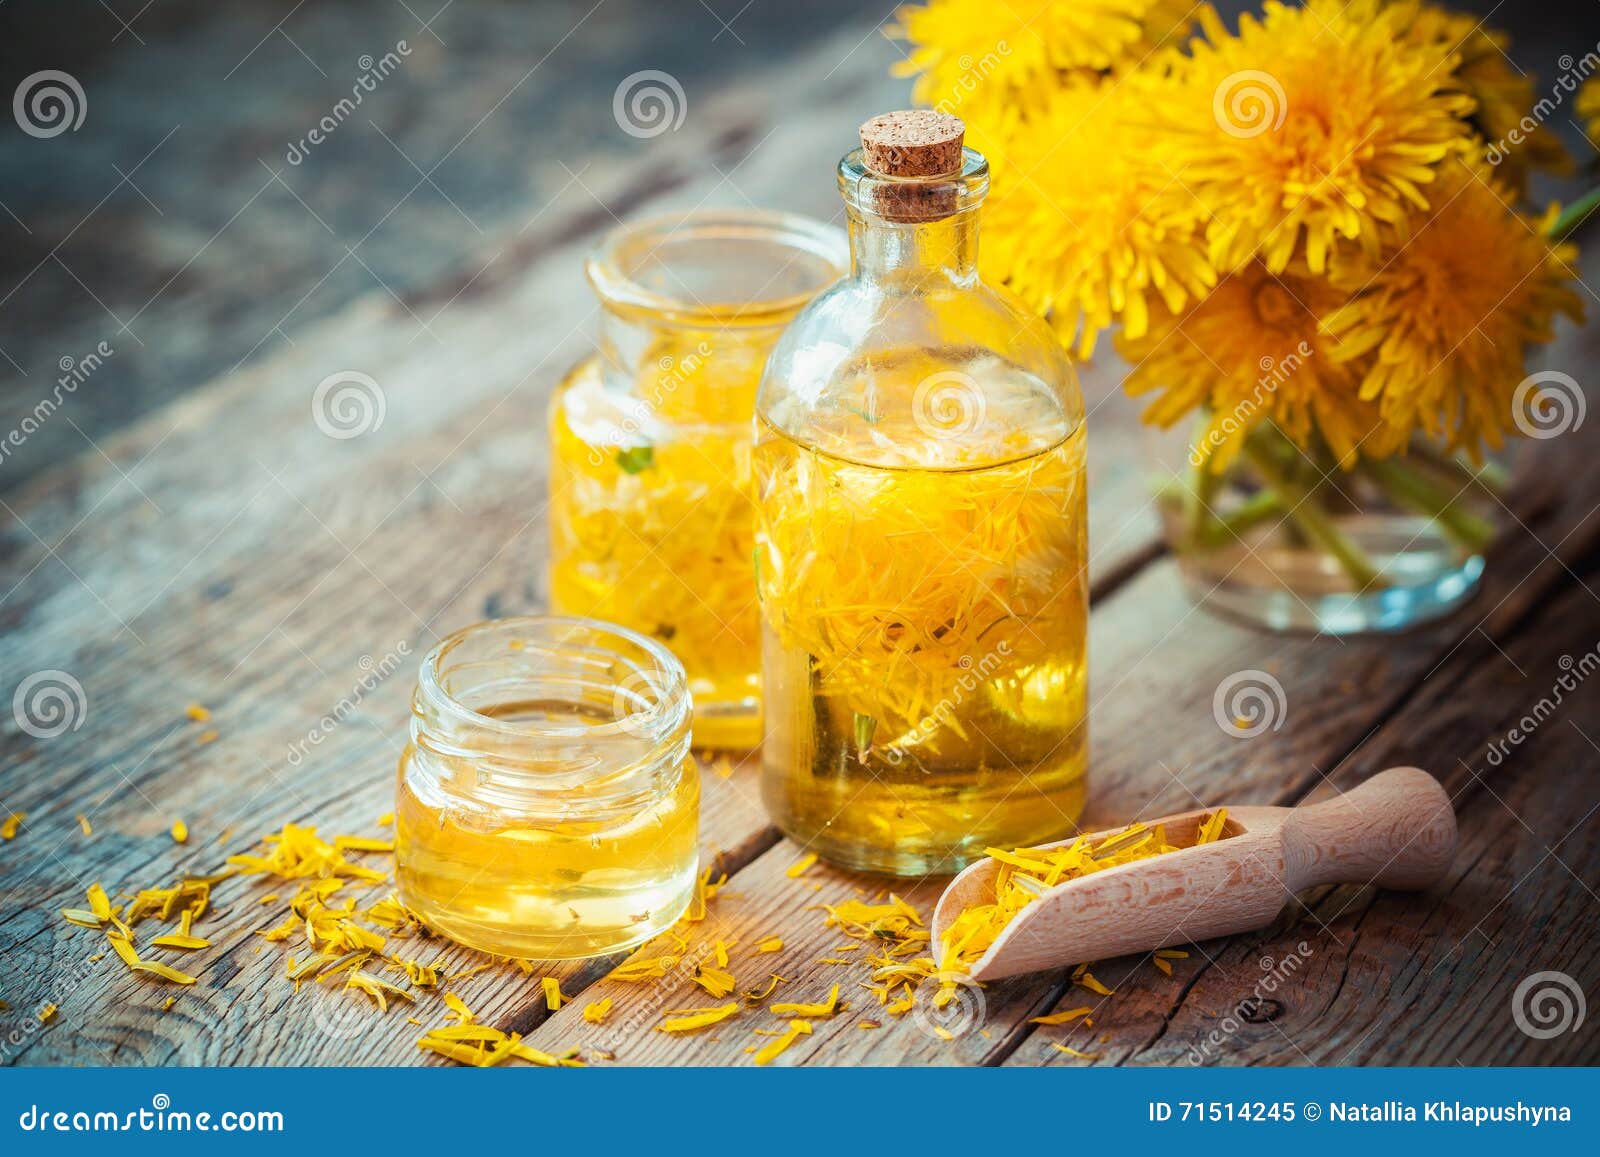 bottles of dandelion tincture or oil and flower bunch